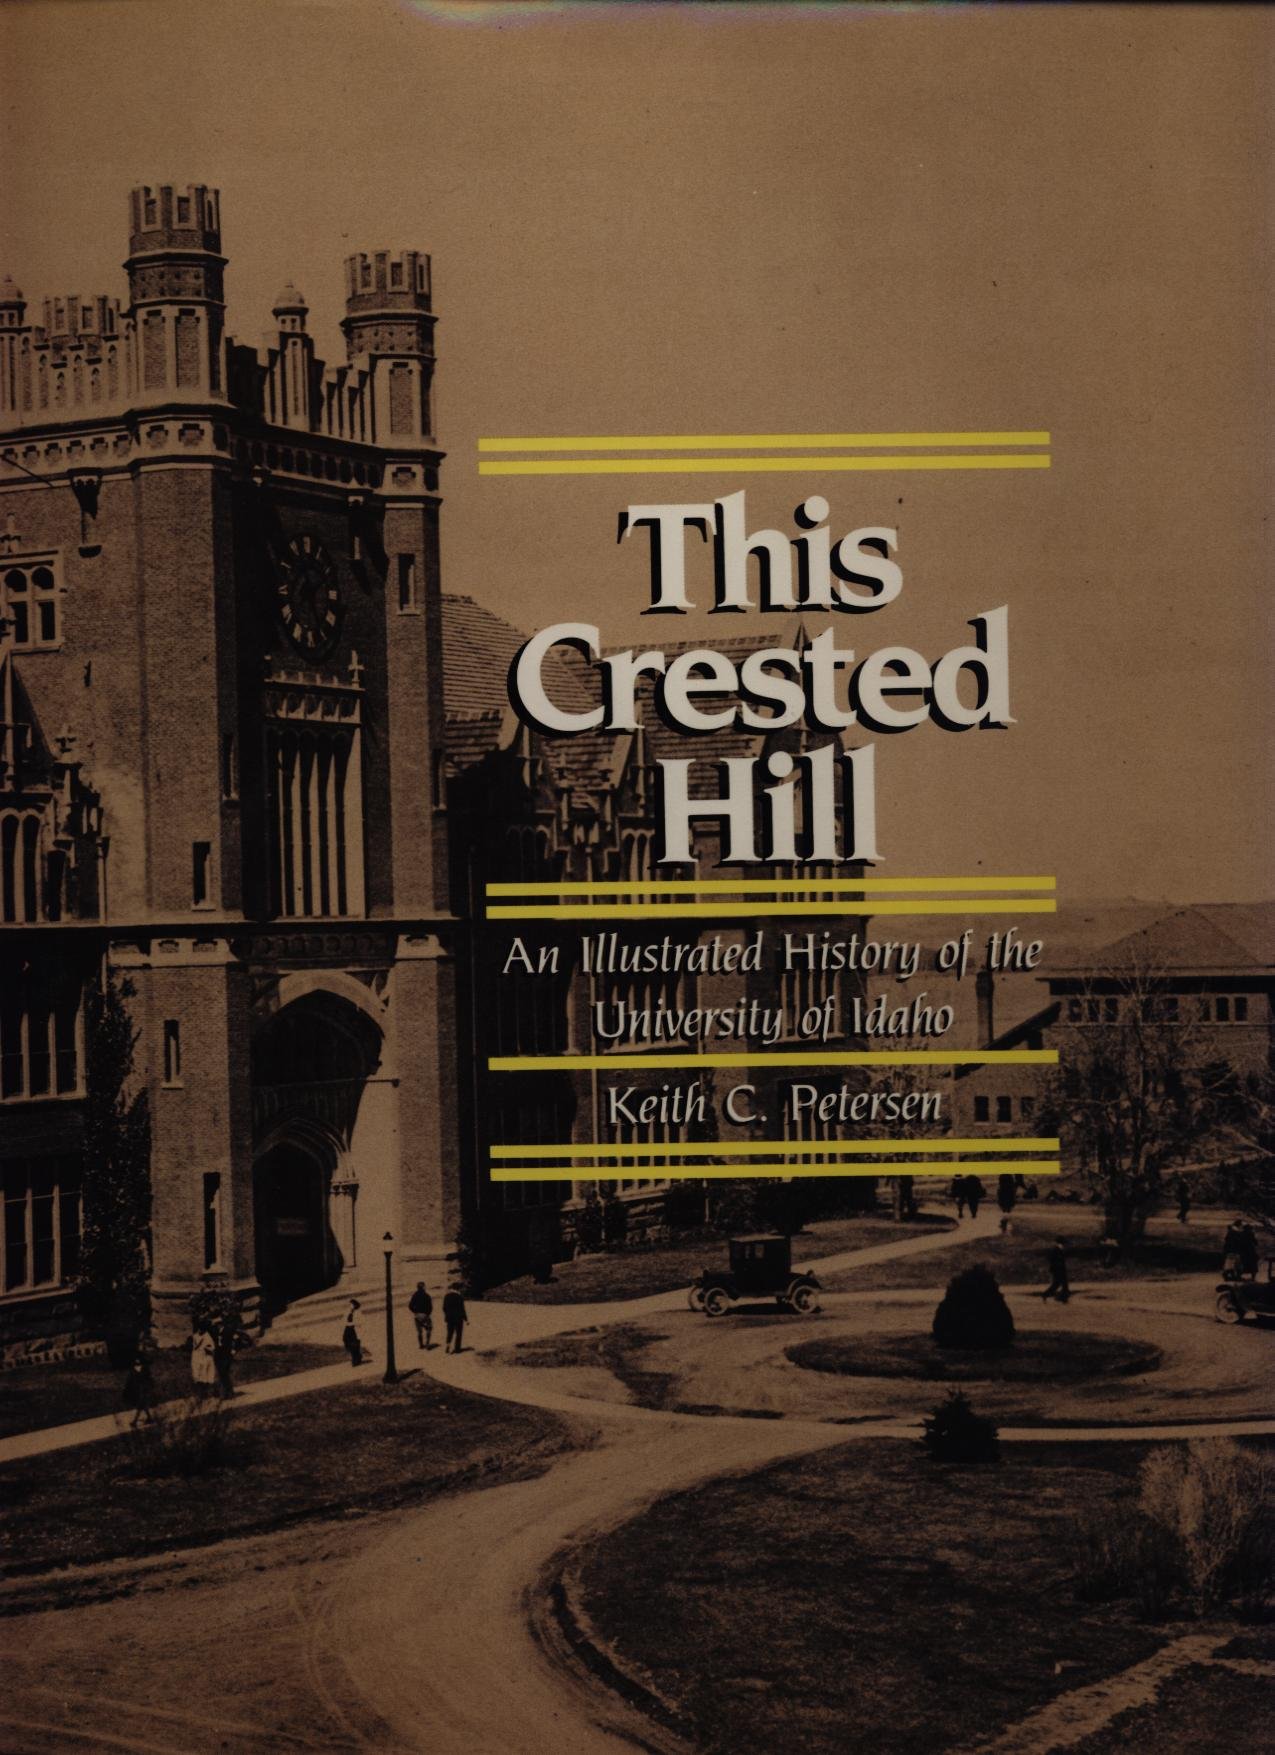 This crested hill: An illustrated history of the University of Idaho (book cover)